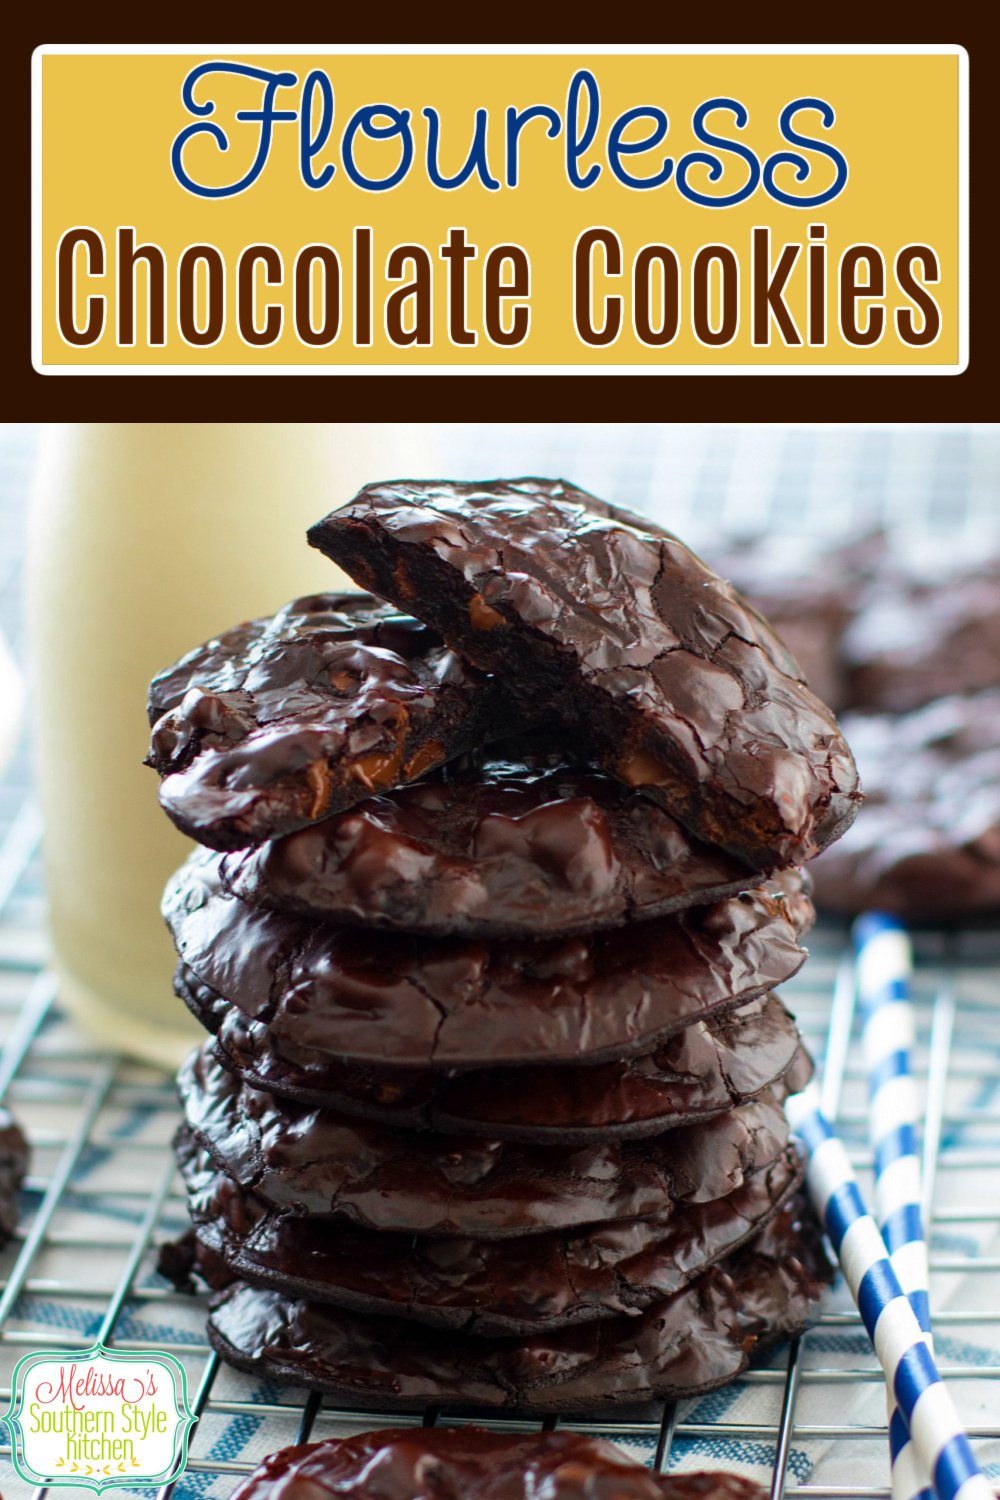 Rich and fudgy Flourless Chocolate Cookies! #chocolatecookies #glutenfreecookies #chocolate #cookierecipes #holidaybaking #holidays #christmascookies #flourlesscookies #desserts #dessertfoodrecipes #southernfood #southernrecipes via @melissasssk